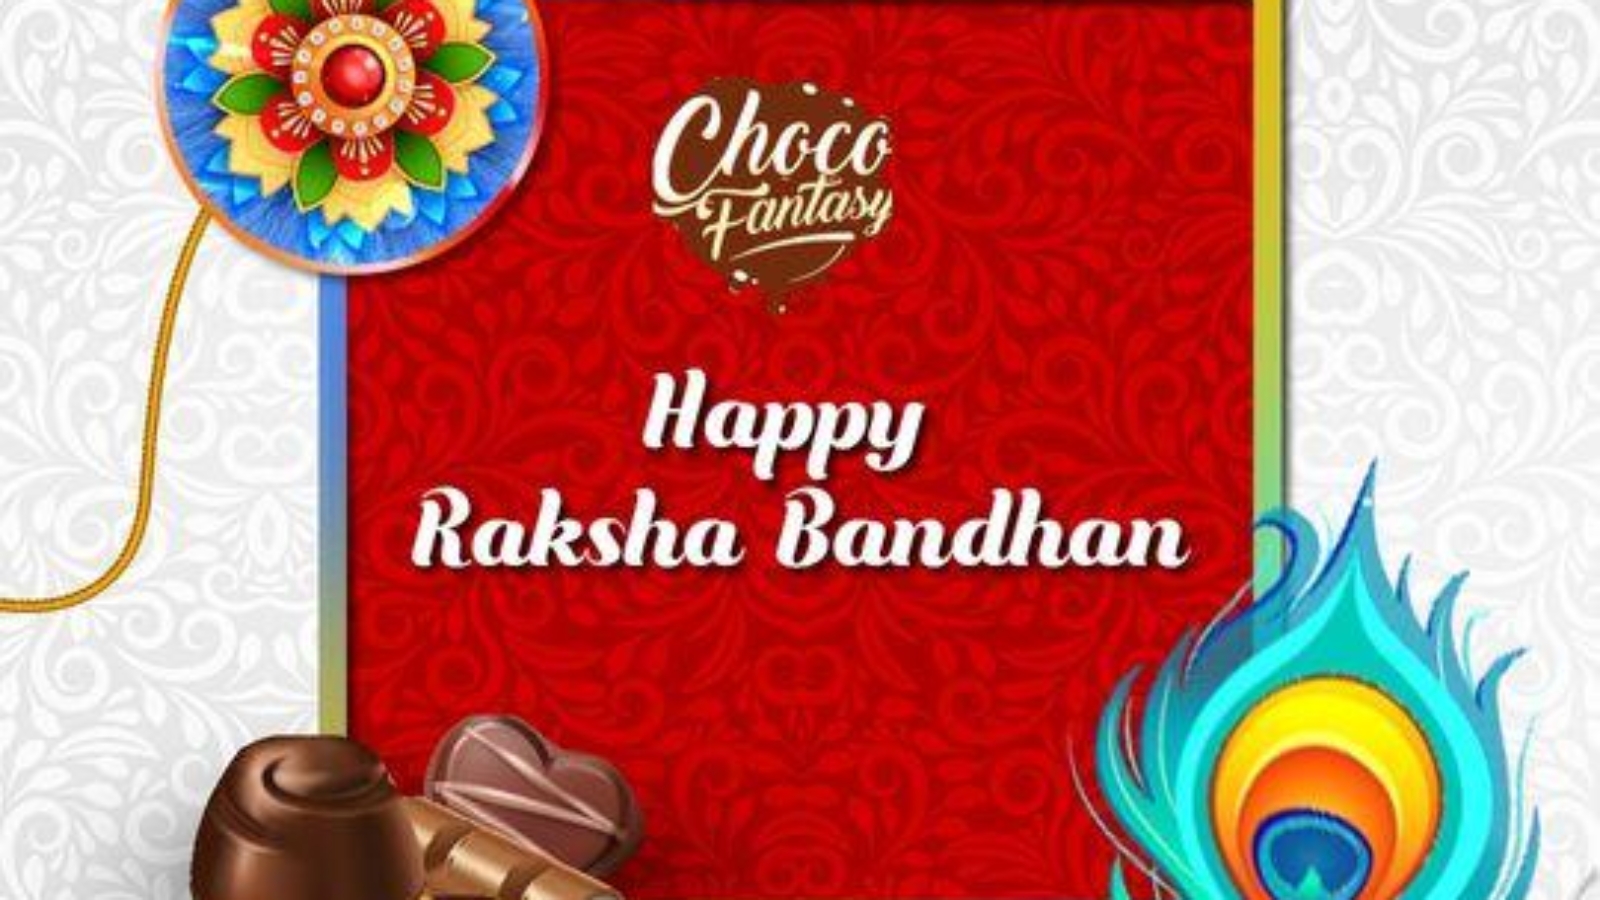 Raksha Bandhan Special Homemade Chocolate Gift box, Best Gift Ideas for Brother